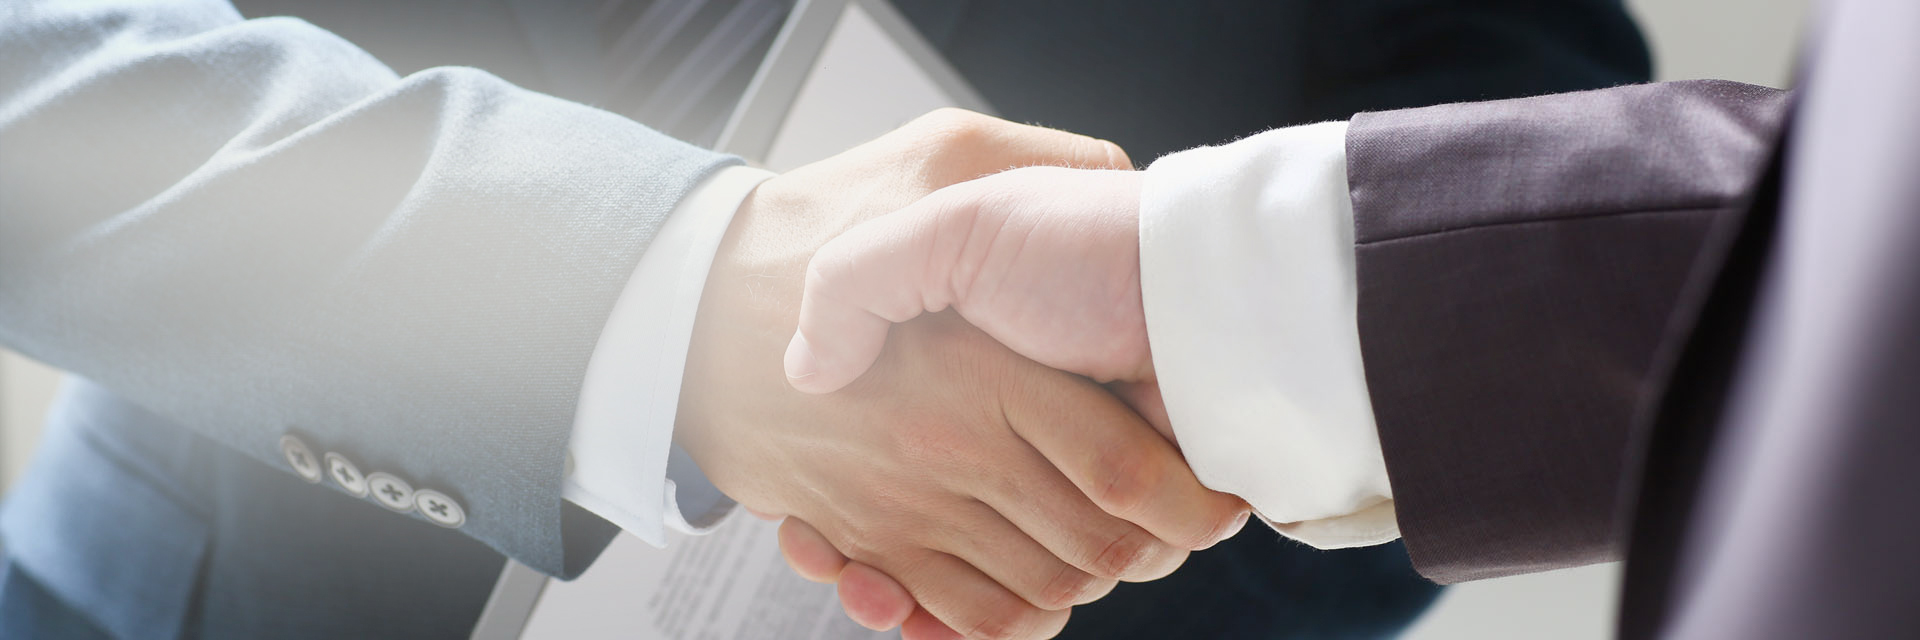 Image showing two men in suits shaking hands